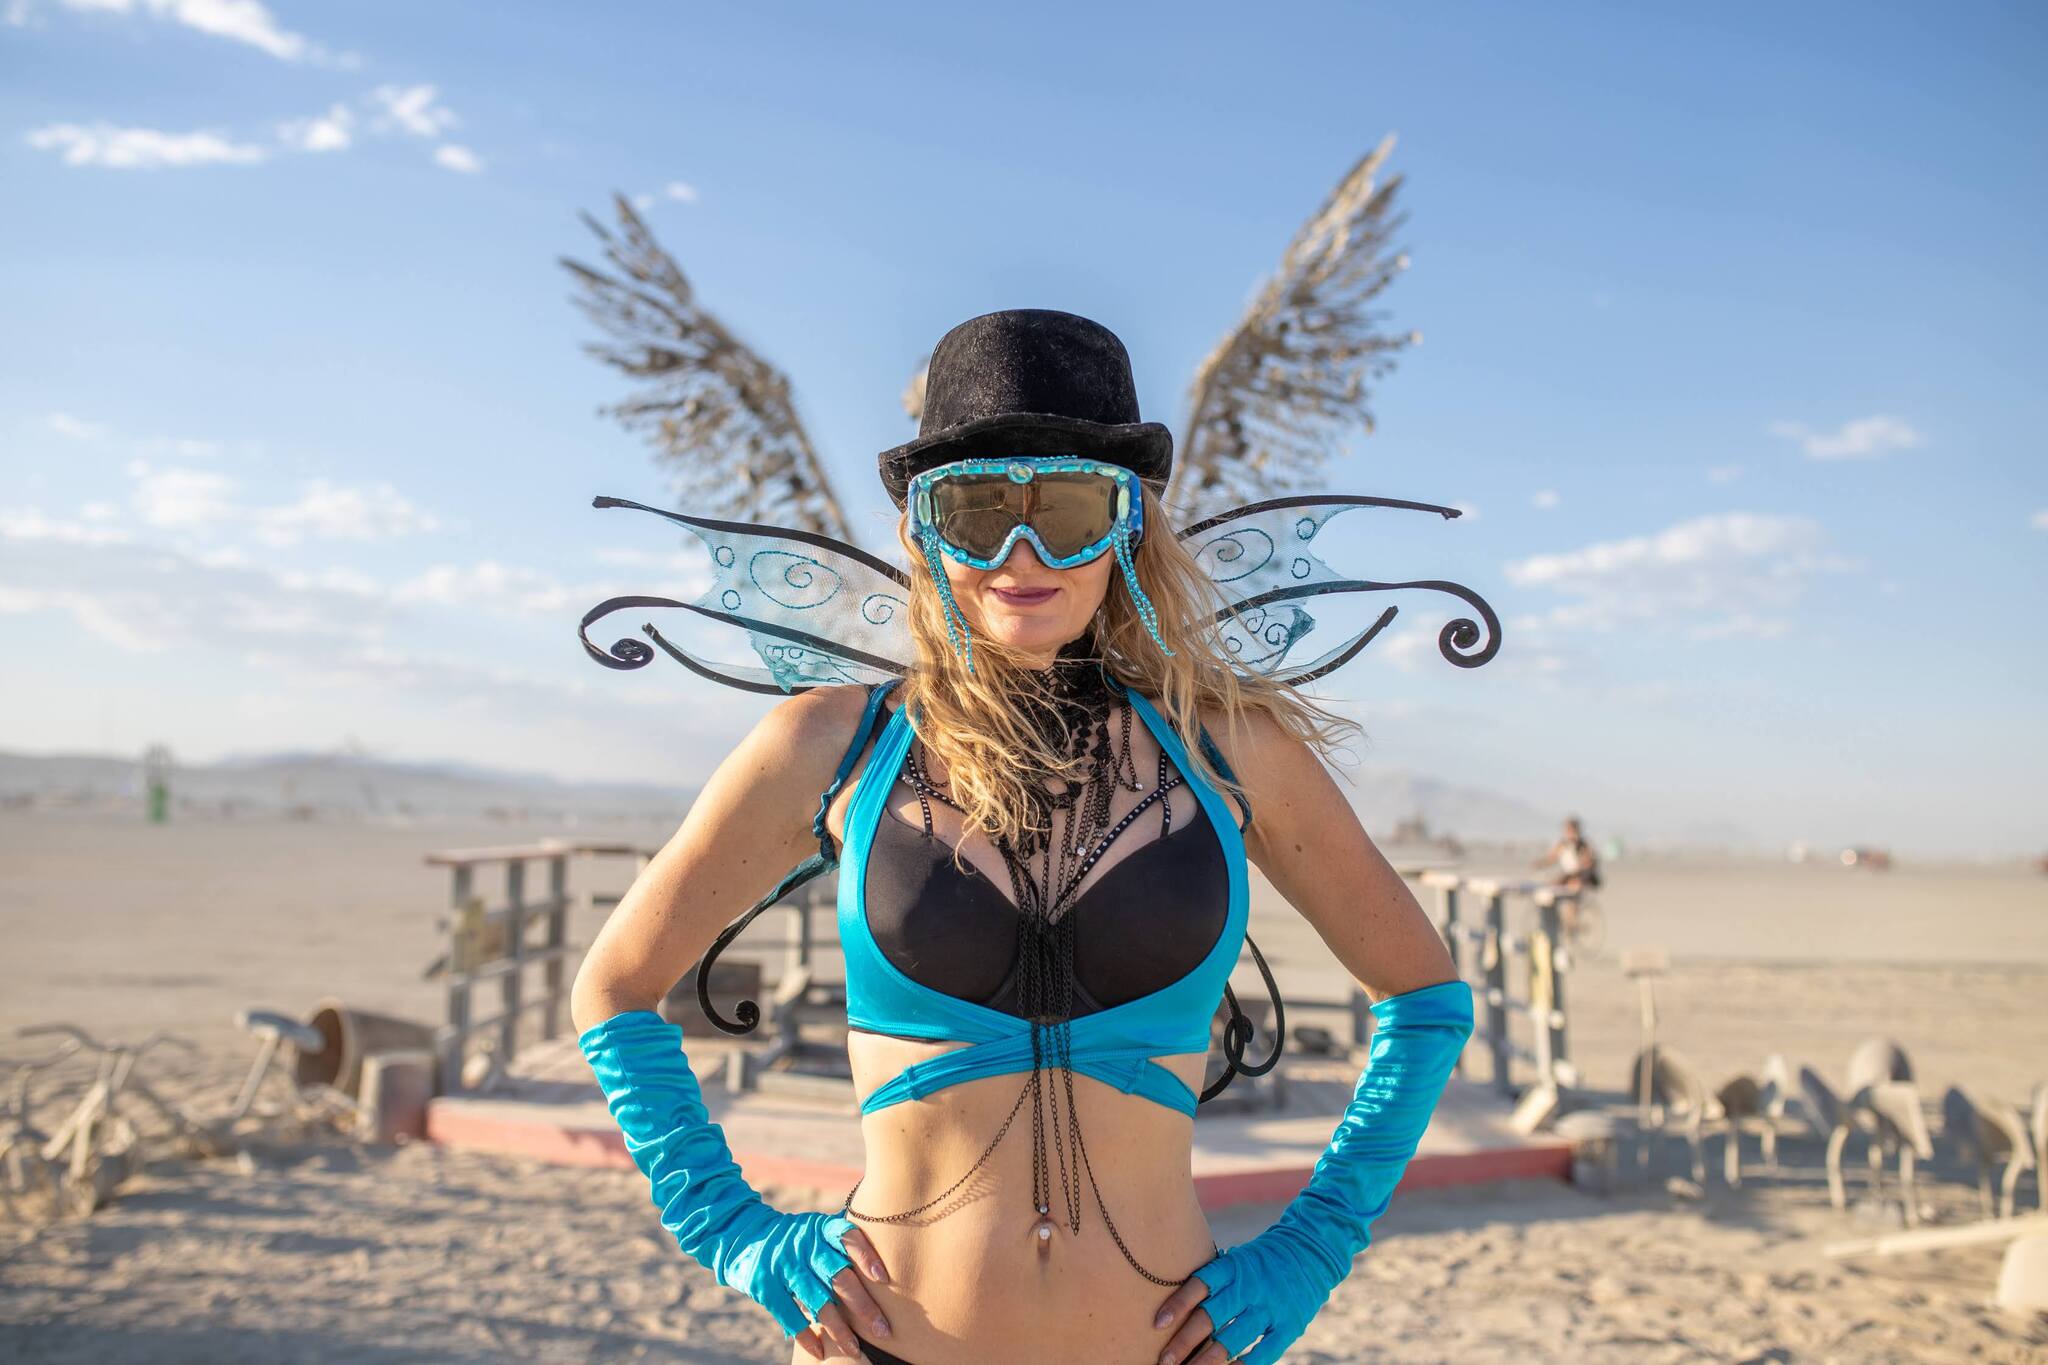 The wildest fashion photos from Burning Man 2022